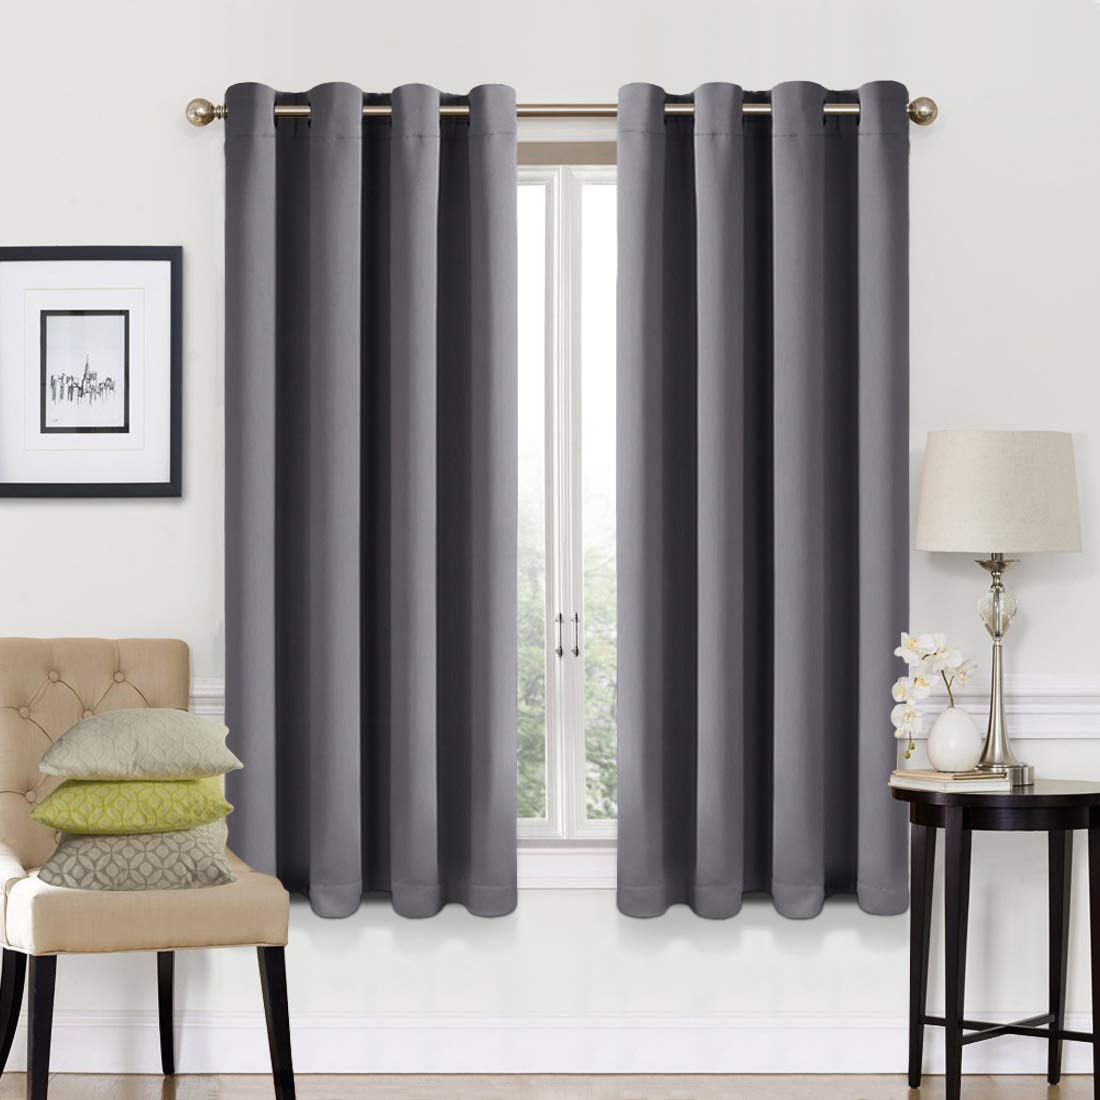 EASELAND 99% Blackout Curtains 2 Panels Set Room Darkening Drapes Thermal Insulated Solid Grommets Window Treatment Pair for Bedroom, Nursery, Living Room